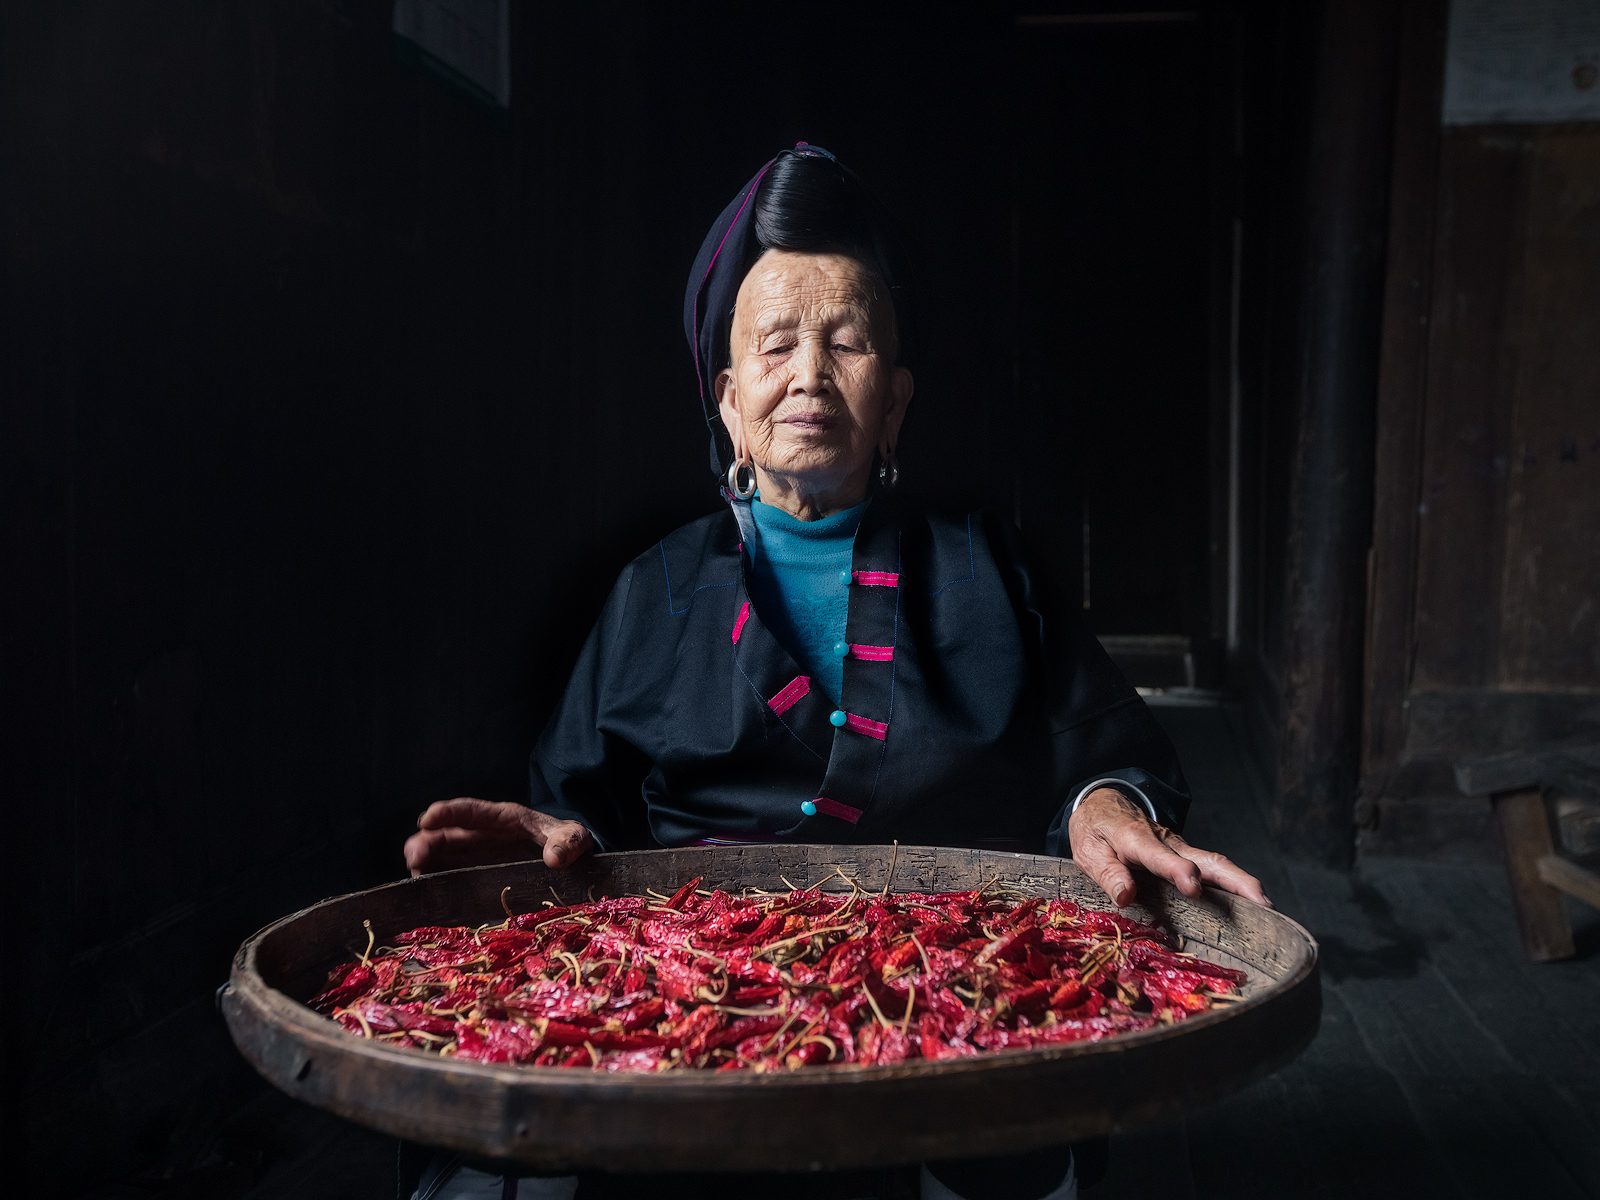 A woman from rural China sorting through chiles in her home.